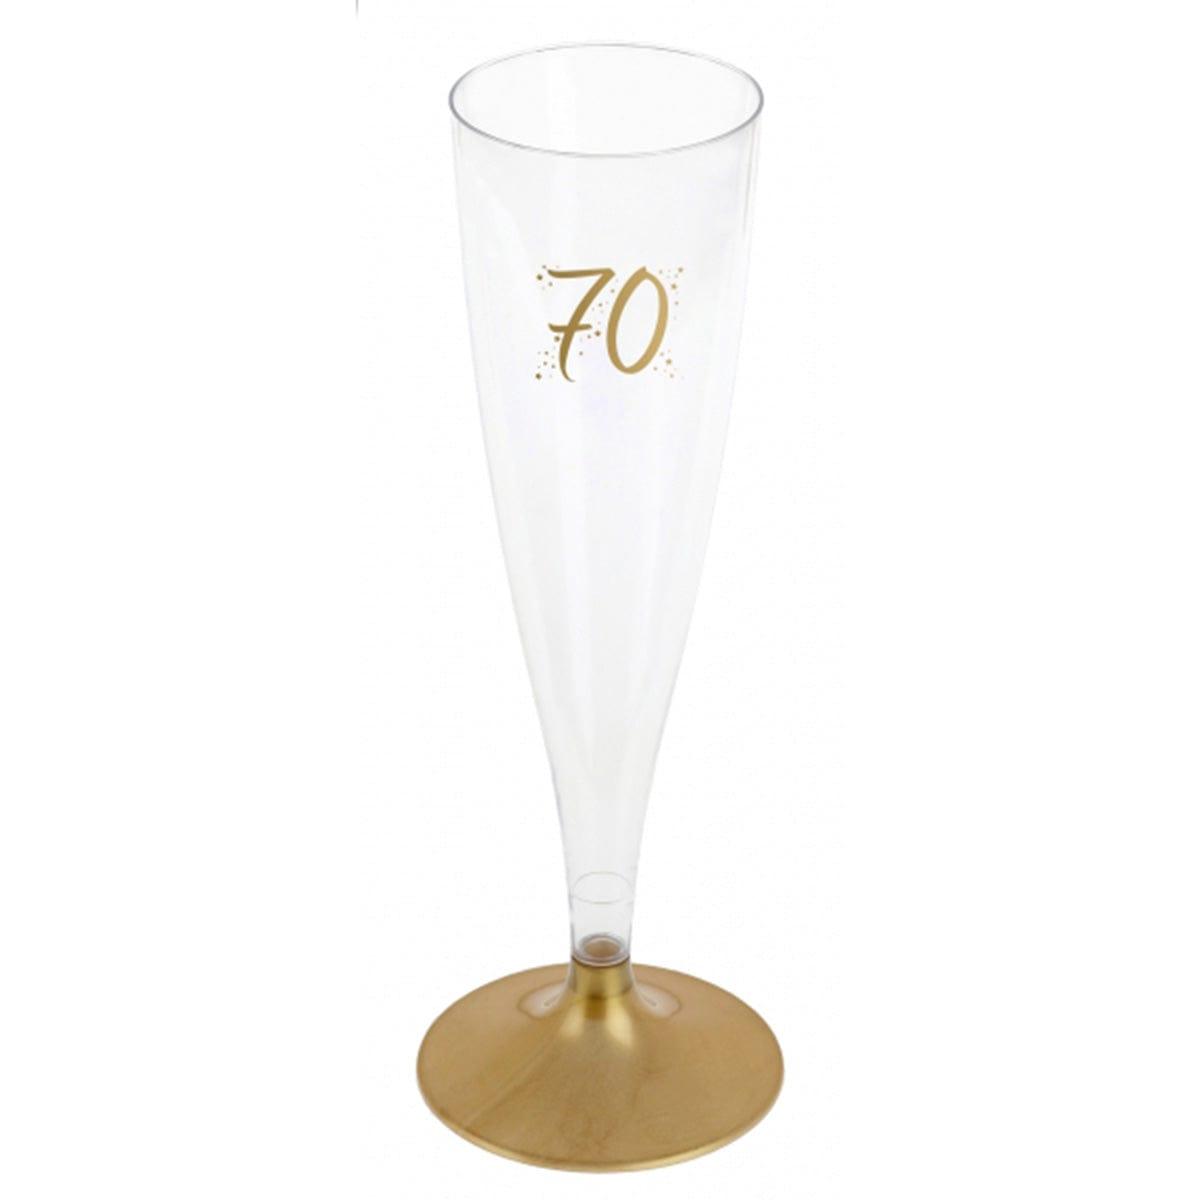 SANTEX Age Specific Birthday 70th Birthday Champagne Flute, Gold, 6 Count